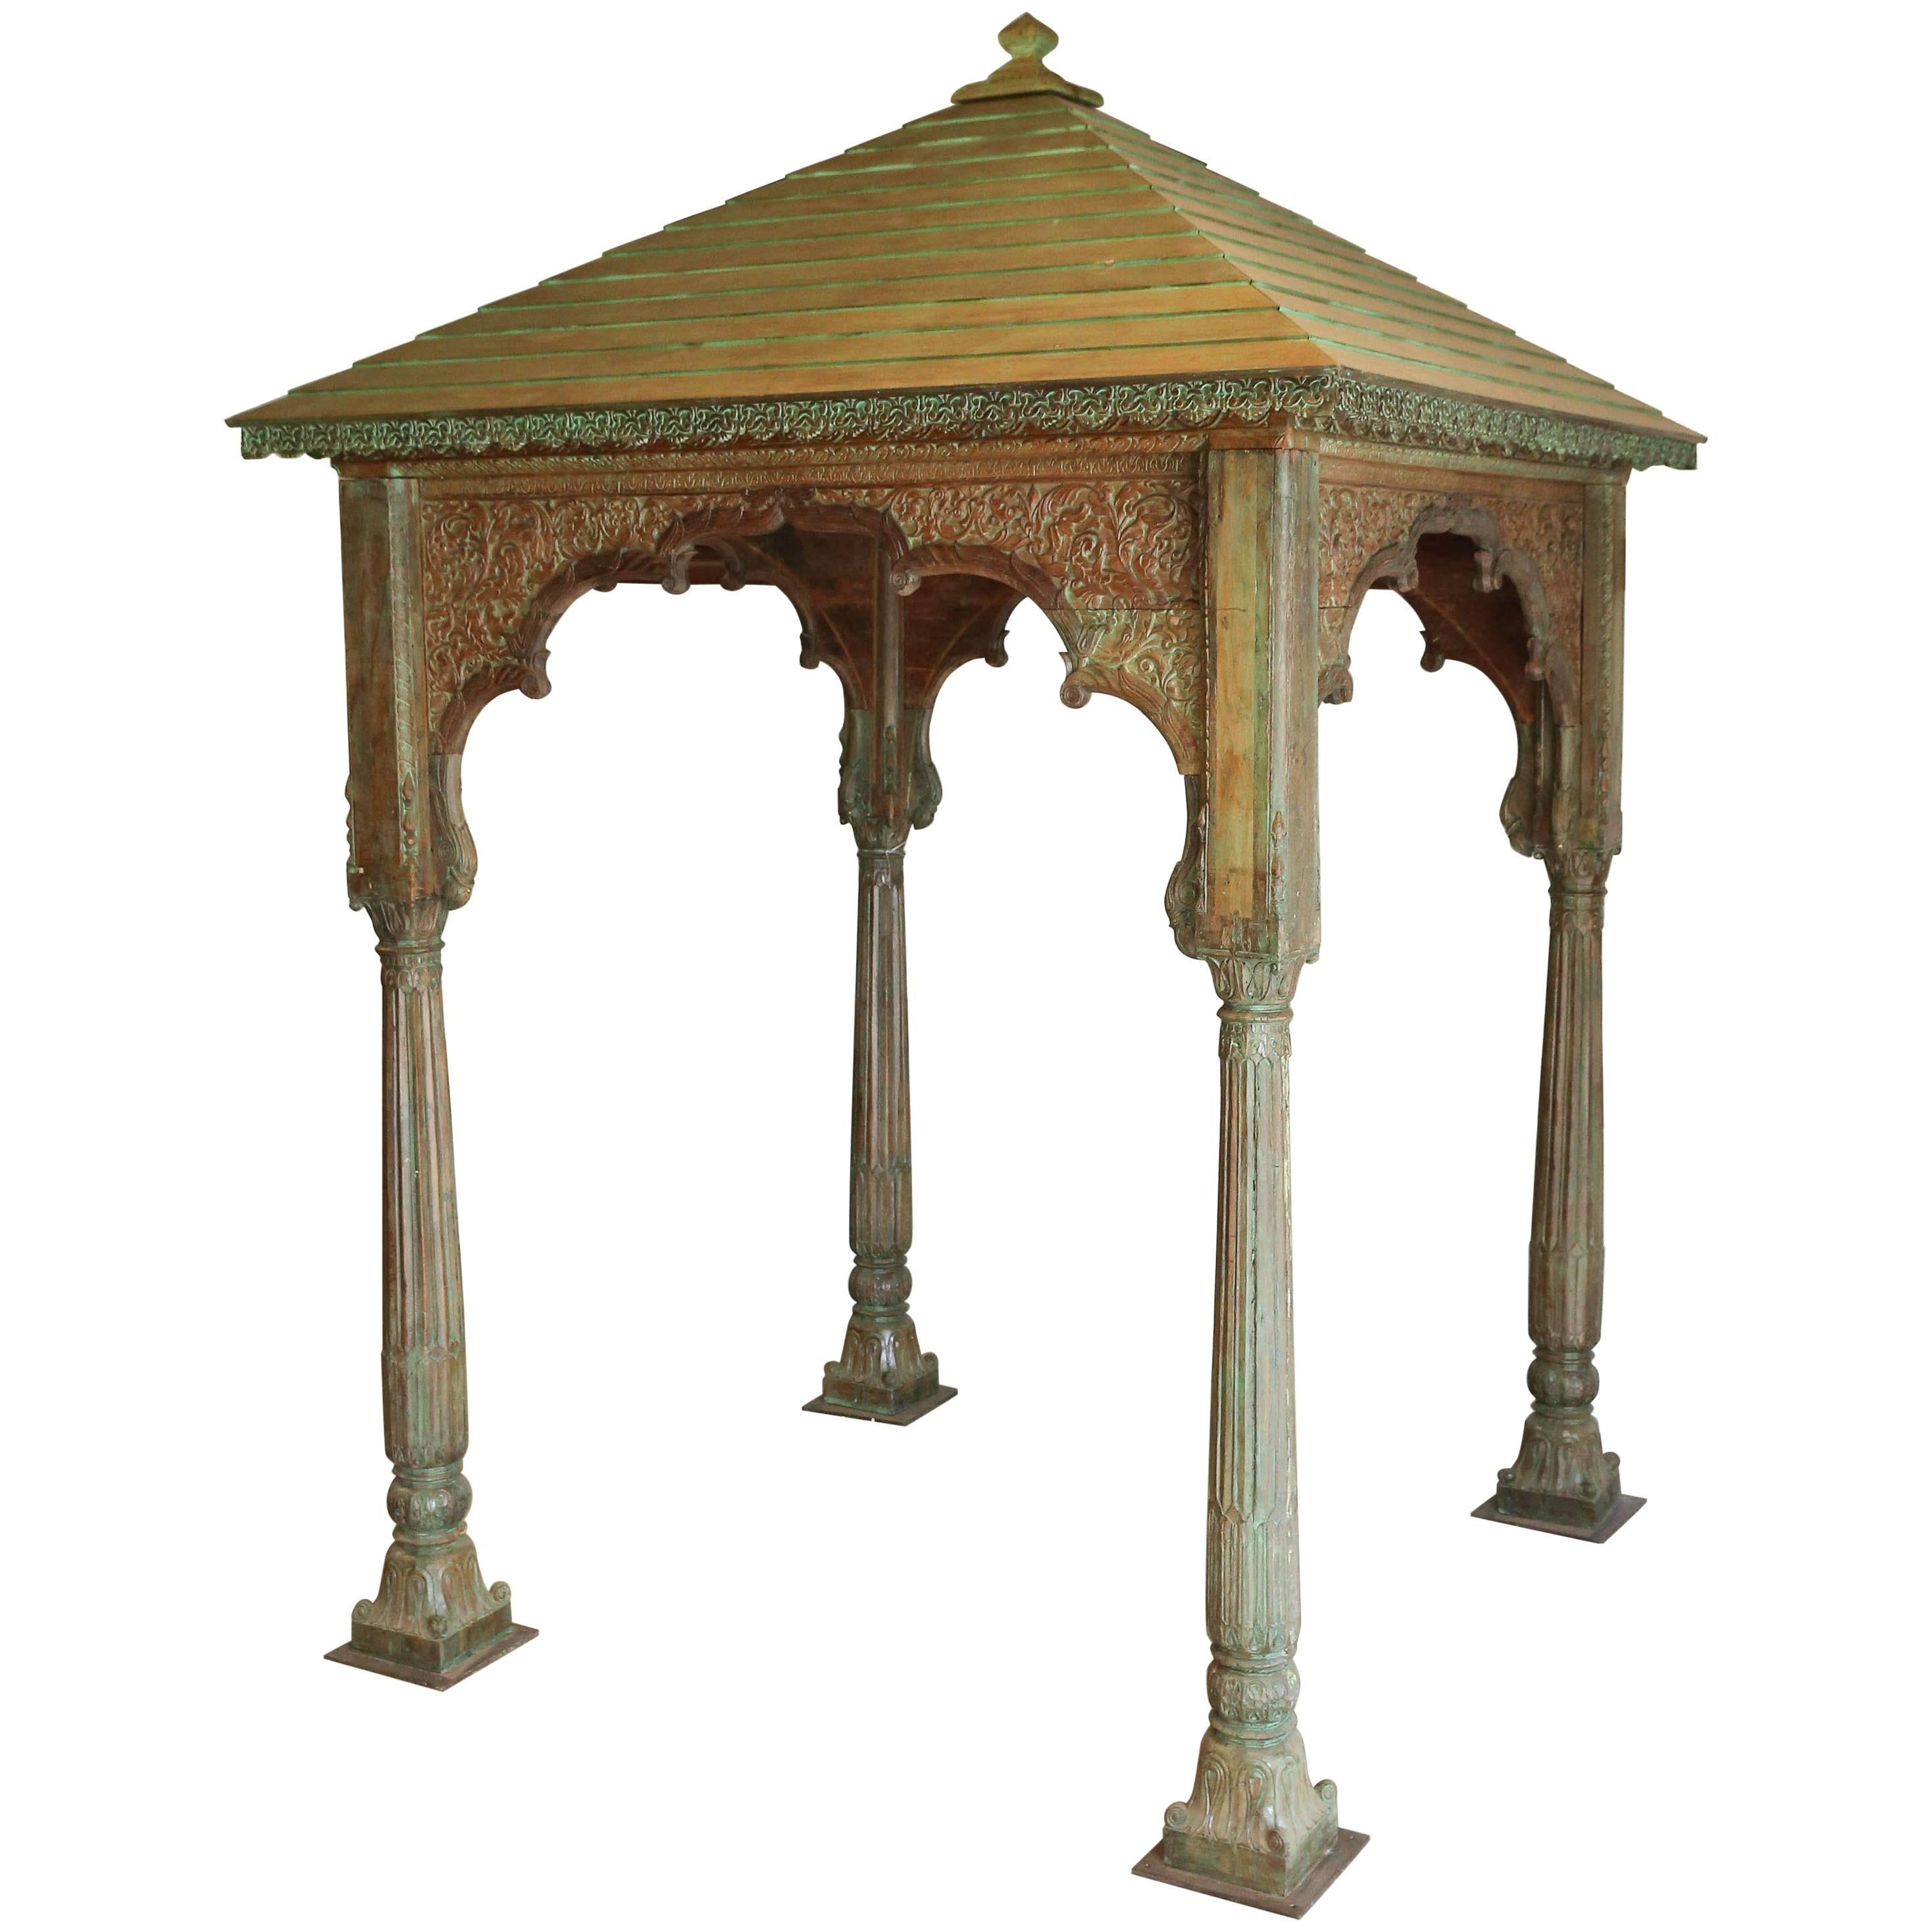 Decorative Solid Teak Wood Late 19th Century Gazebo from a Hindu Temple For Sale